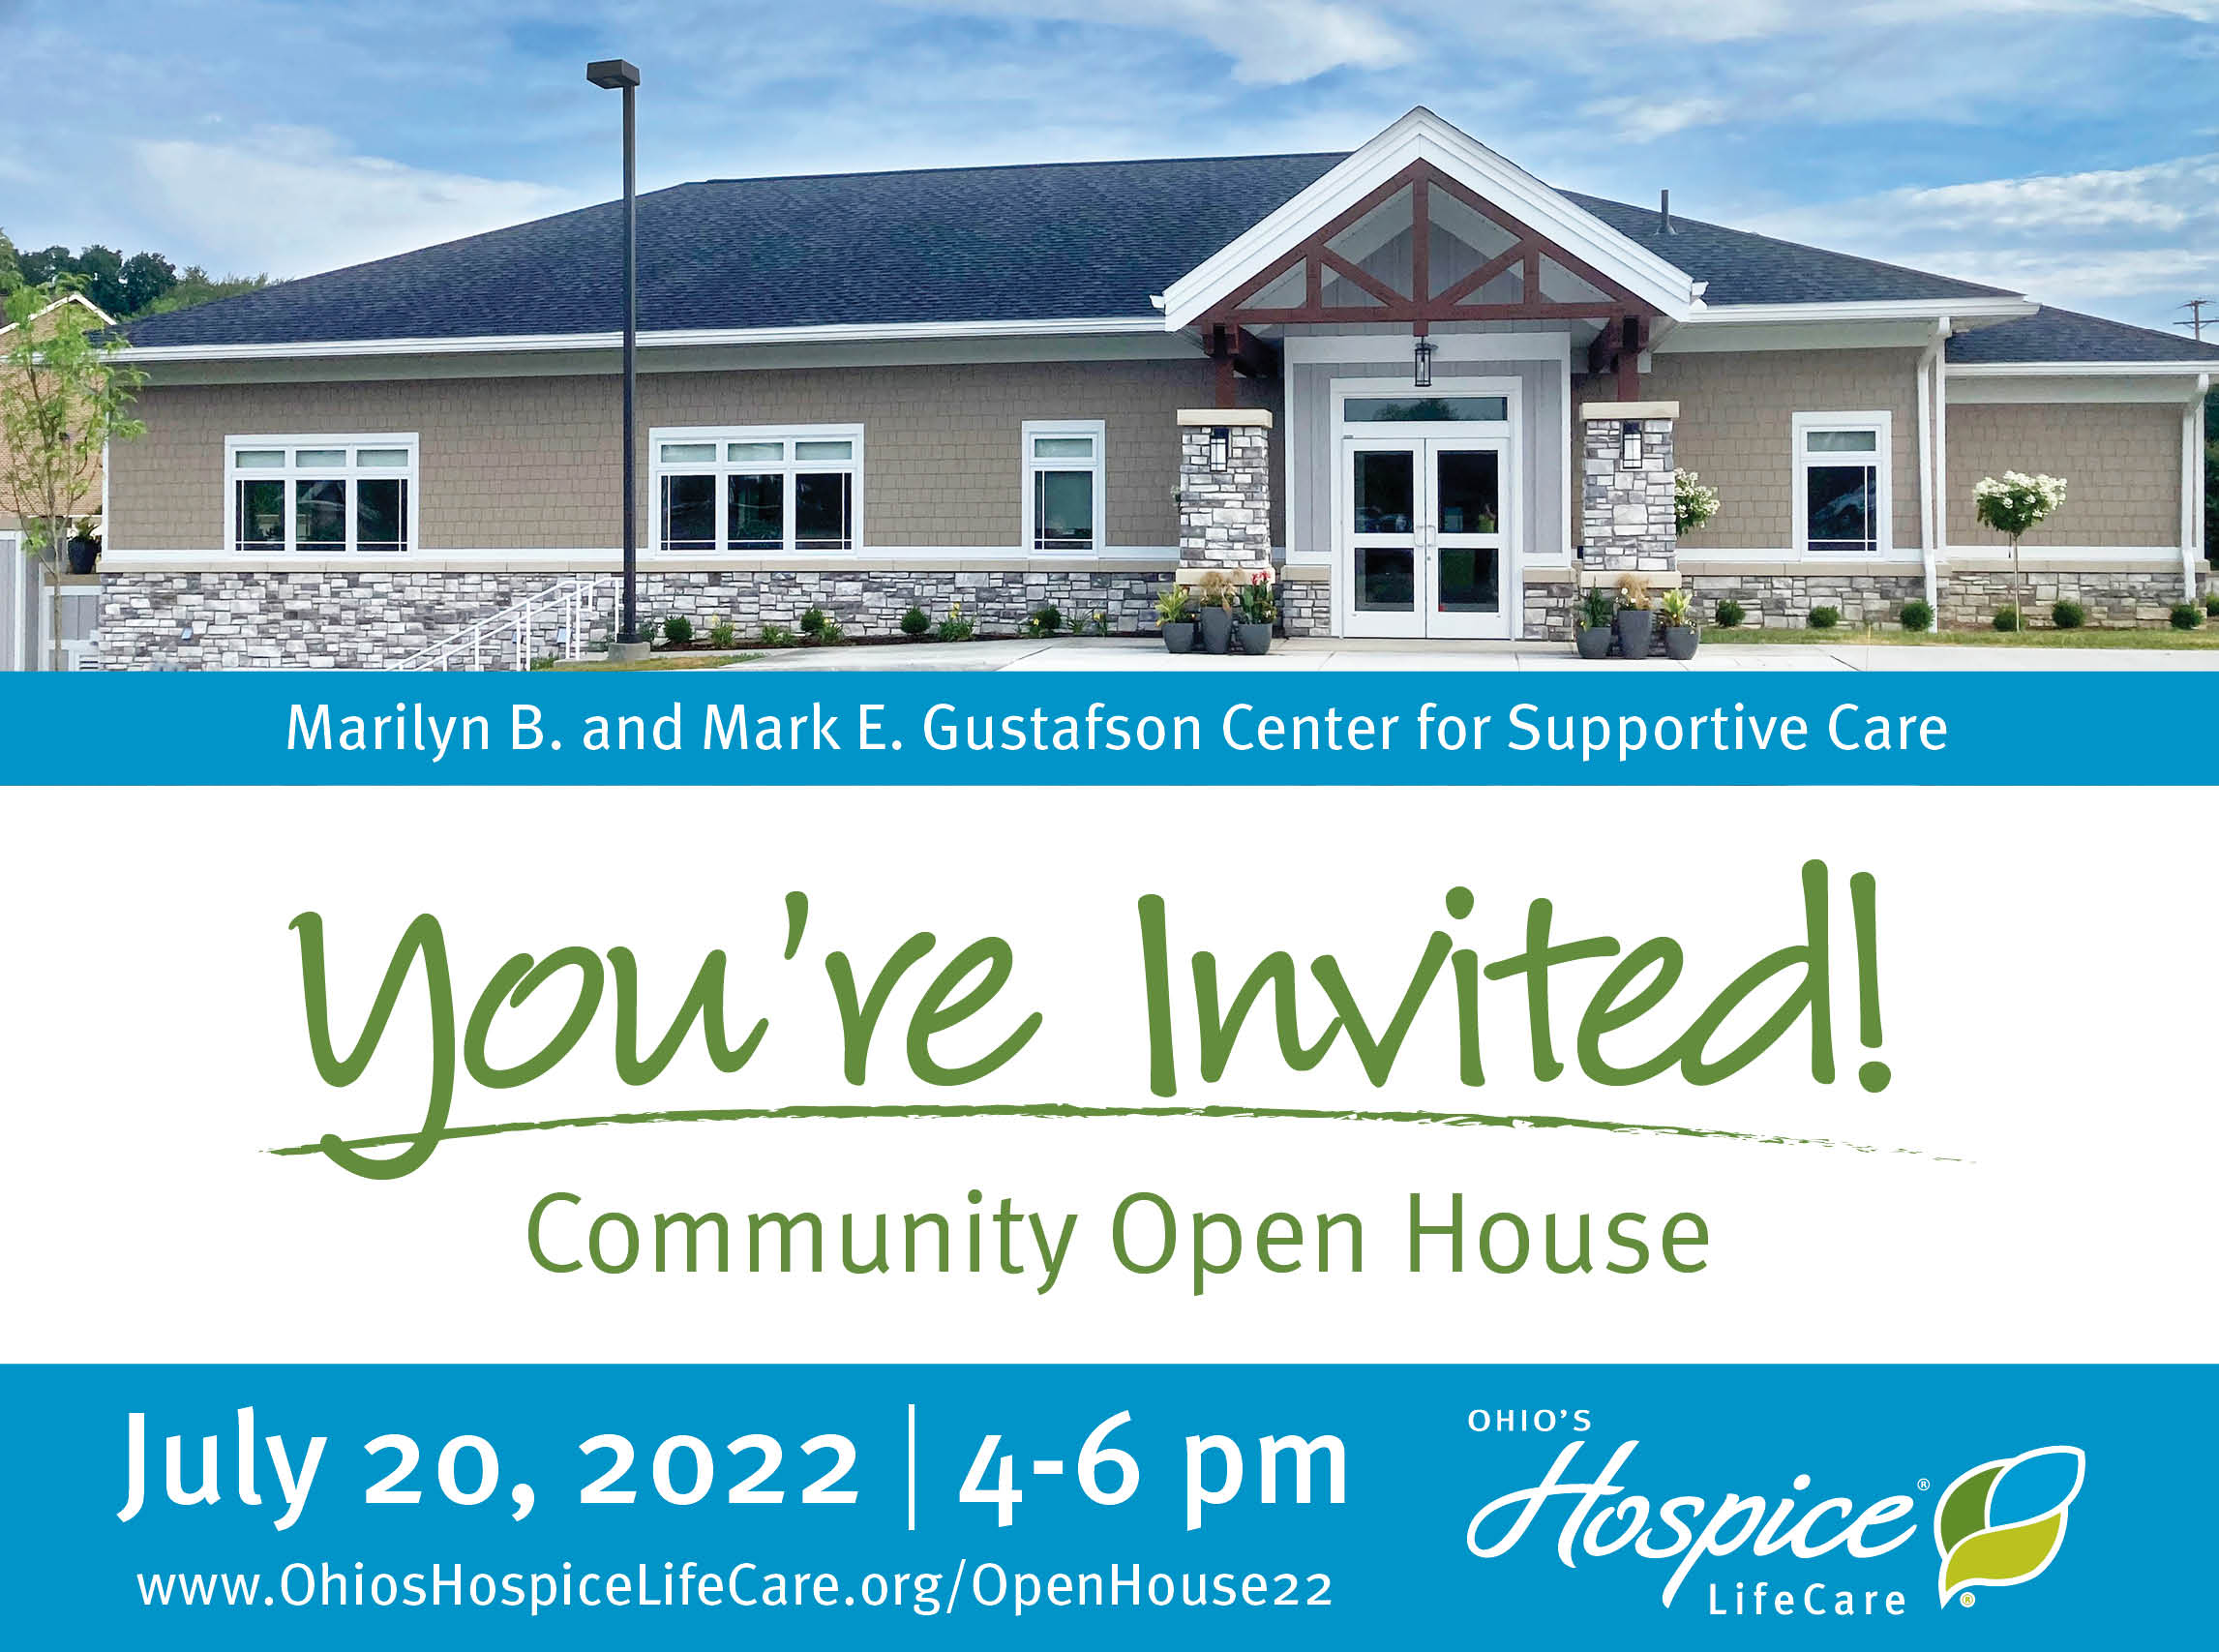 You're Invited! Community Open House July 20, 2022, 4-6 pm, Ohio's Hospice LifeCare